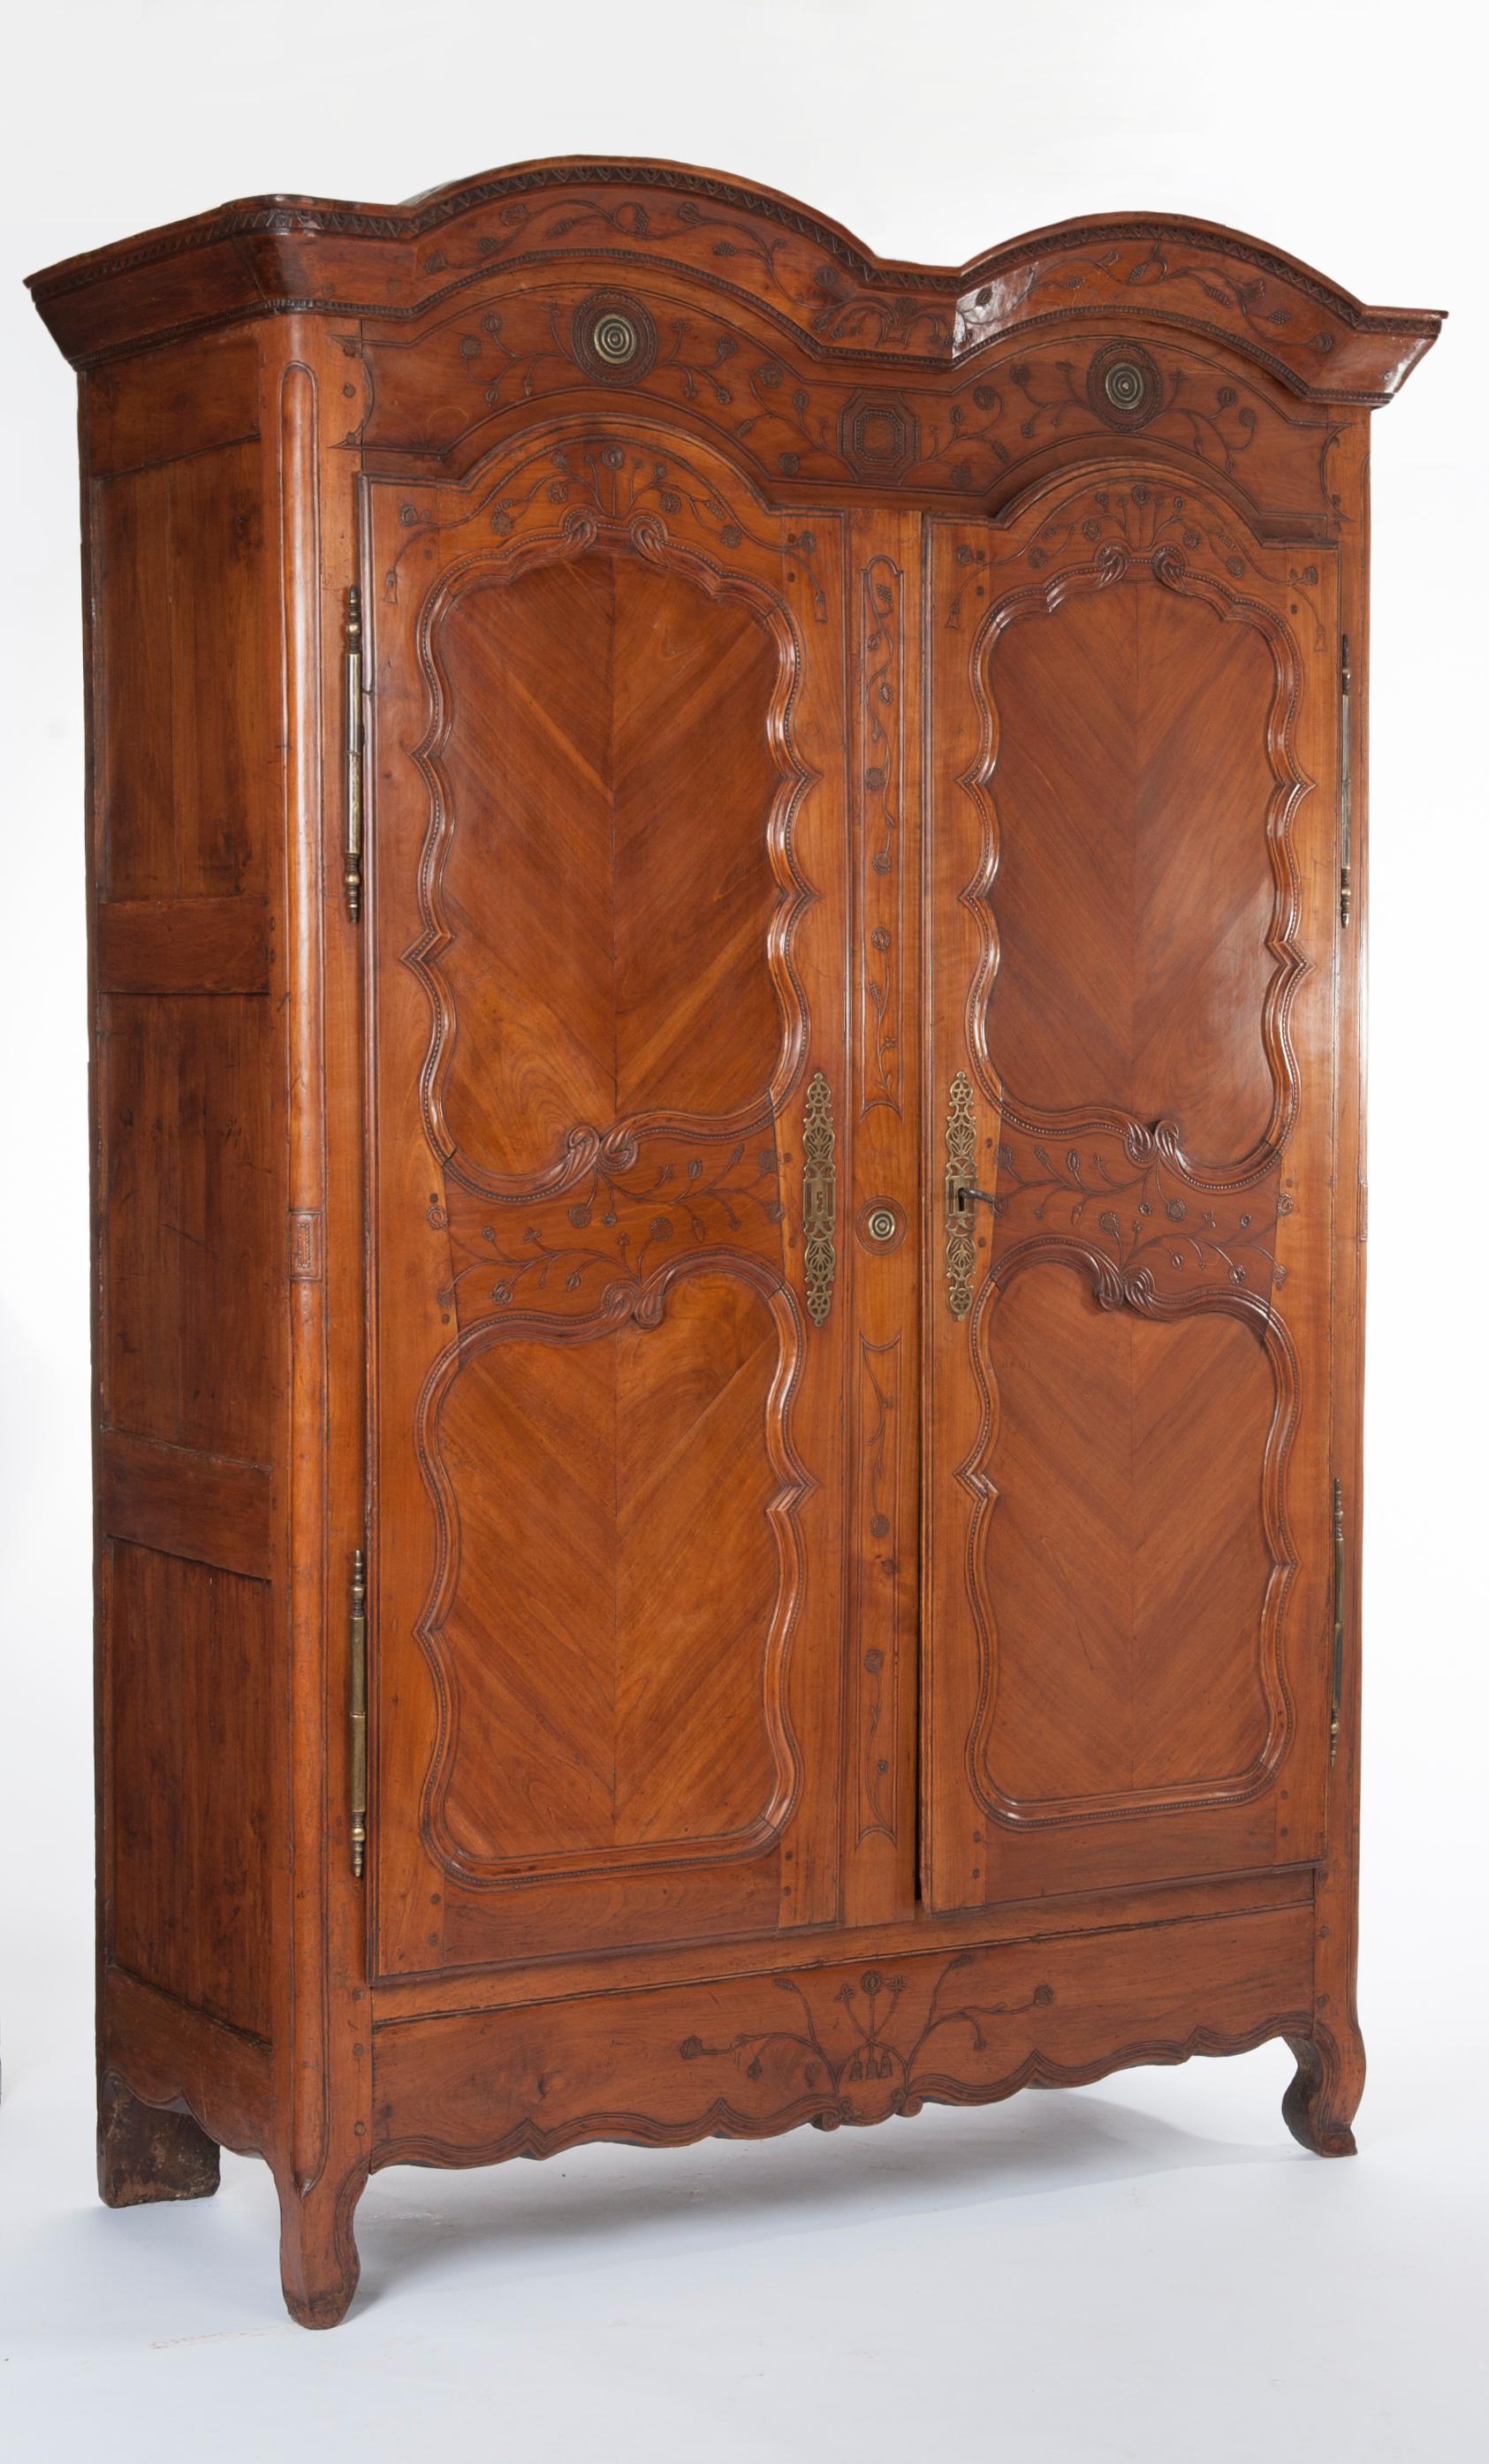 This is a rather beautiful tall French mid-18th century Transition solid cherrywood armoire cupboard with bonnet top (chapeau de gendarme), decorative shaped panels and original brass door furniture and locks. Fitted interior, including three